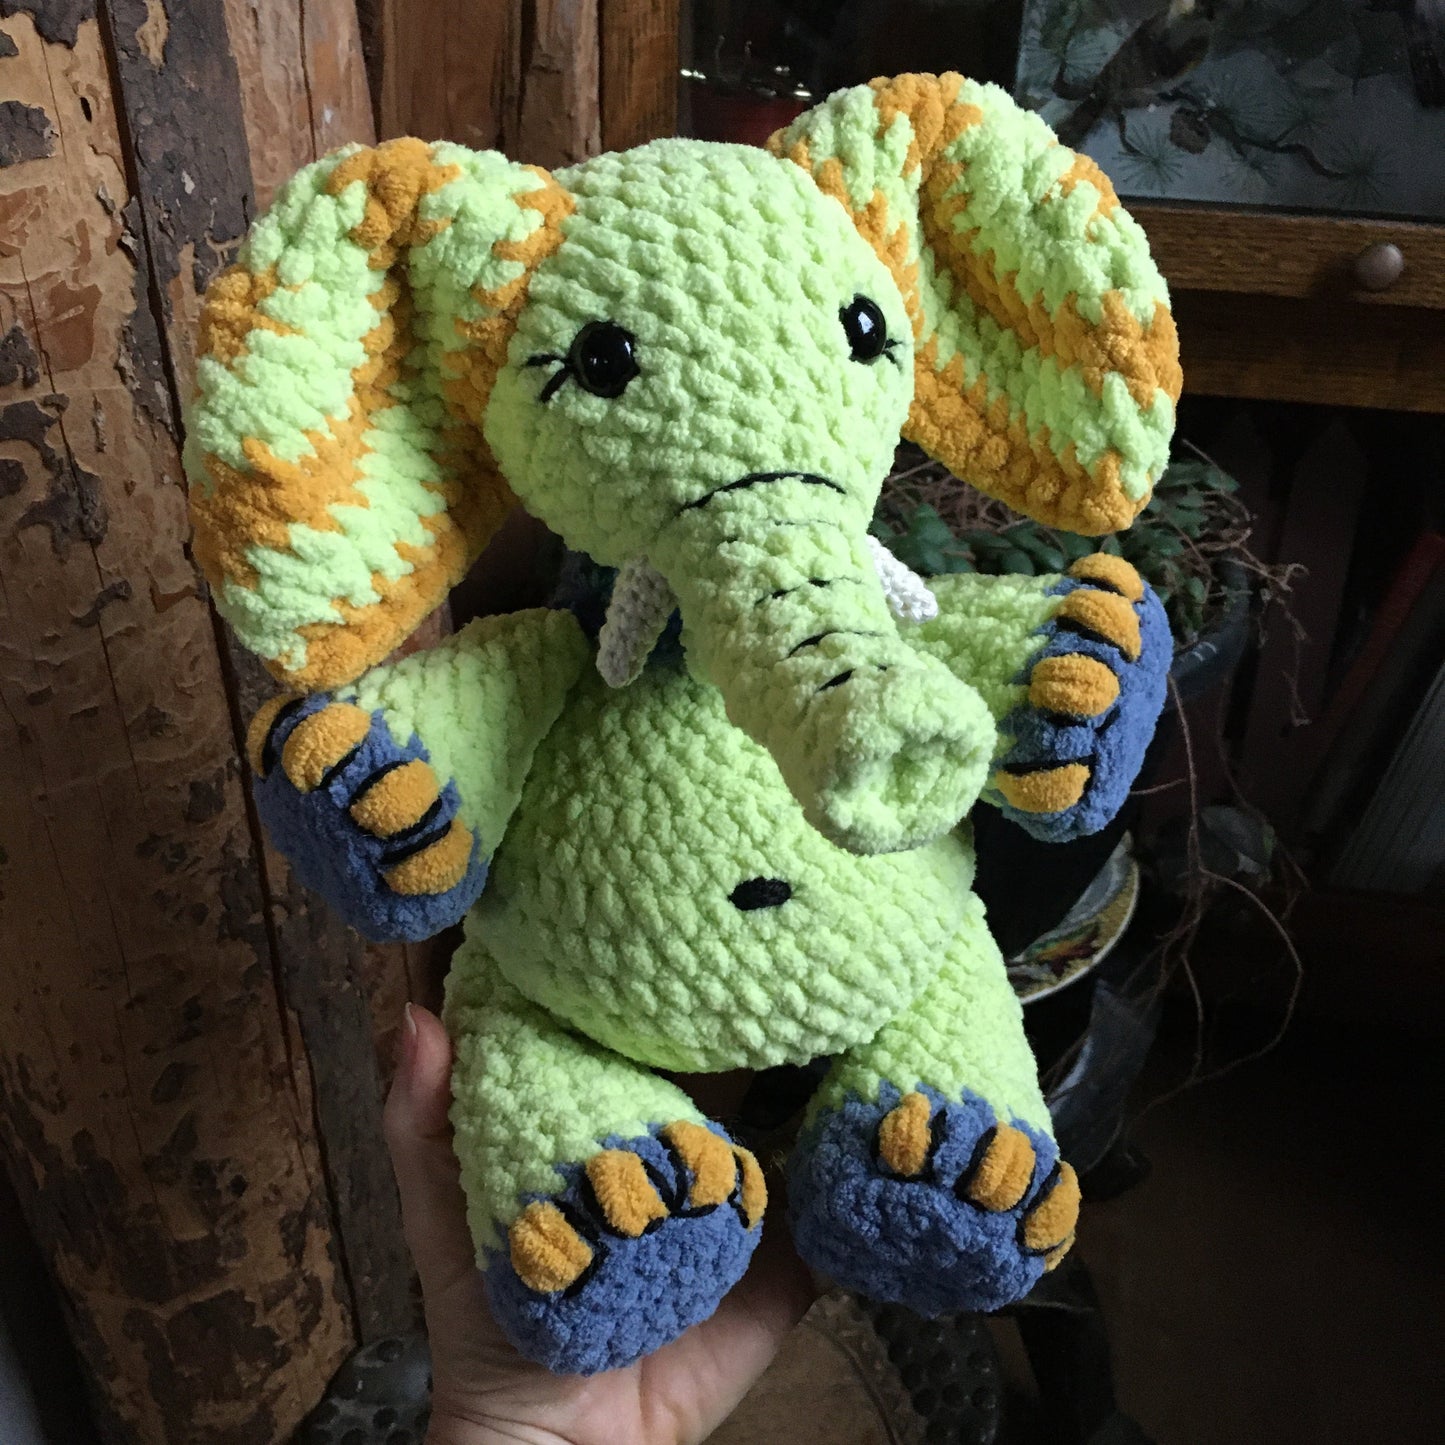 API THE LIME GREEN ELEPHANT with big belly, can be personalized as a BIRTH DOGGIE